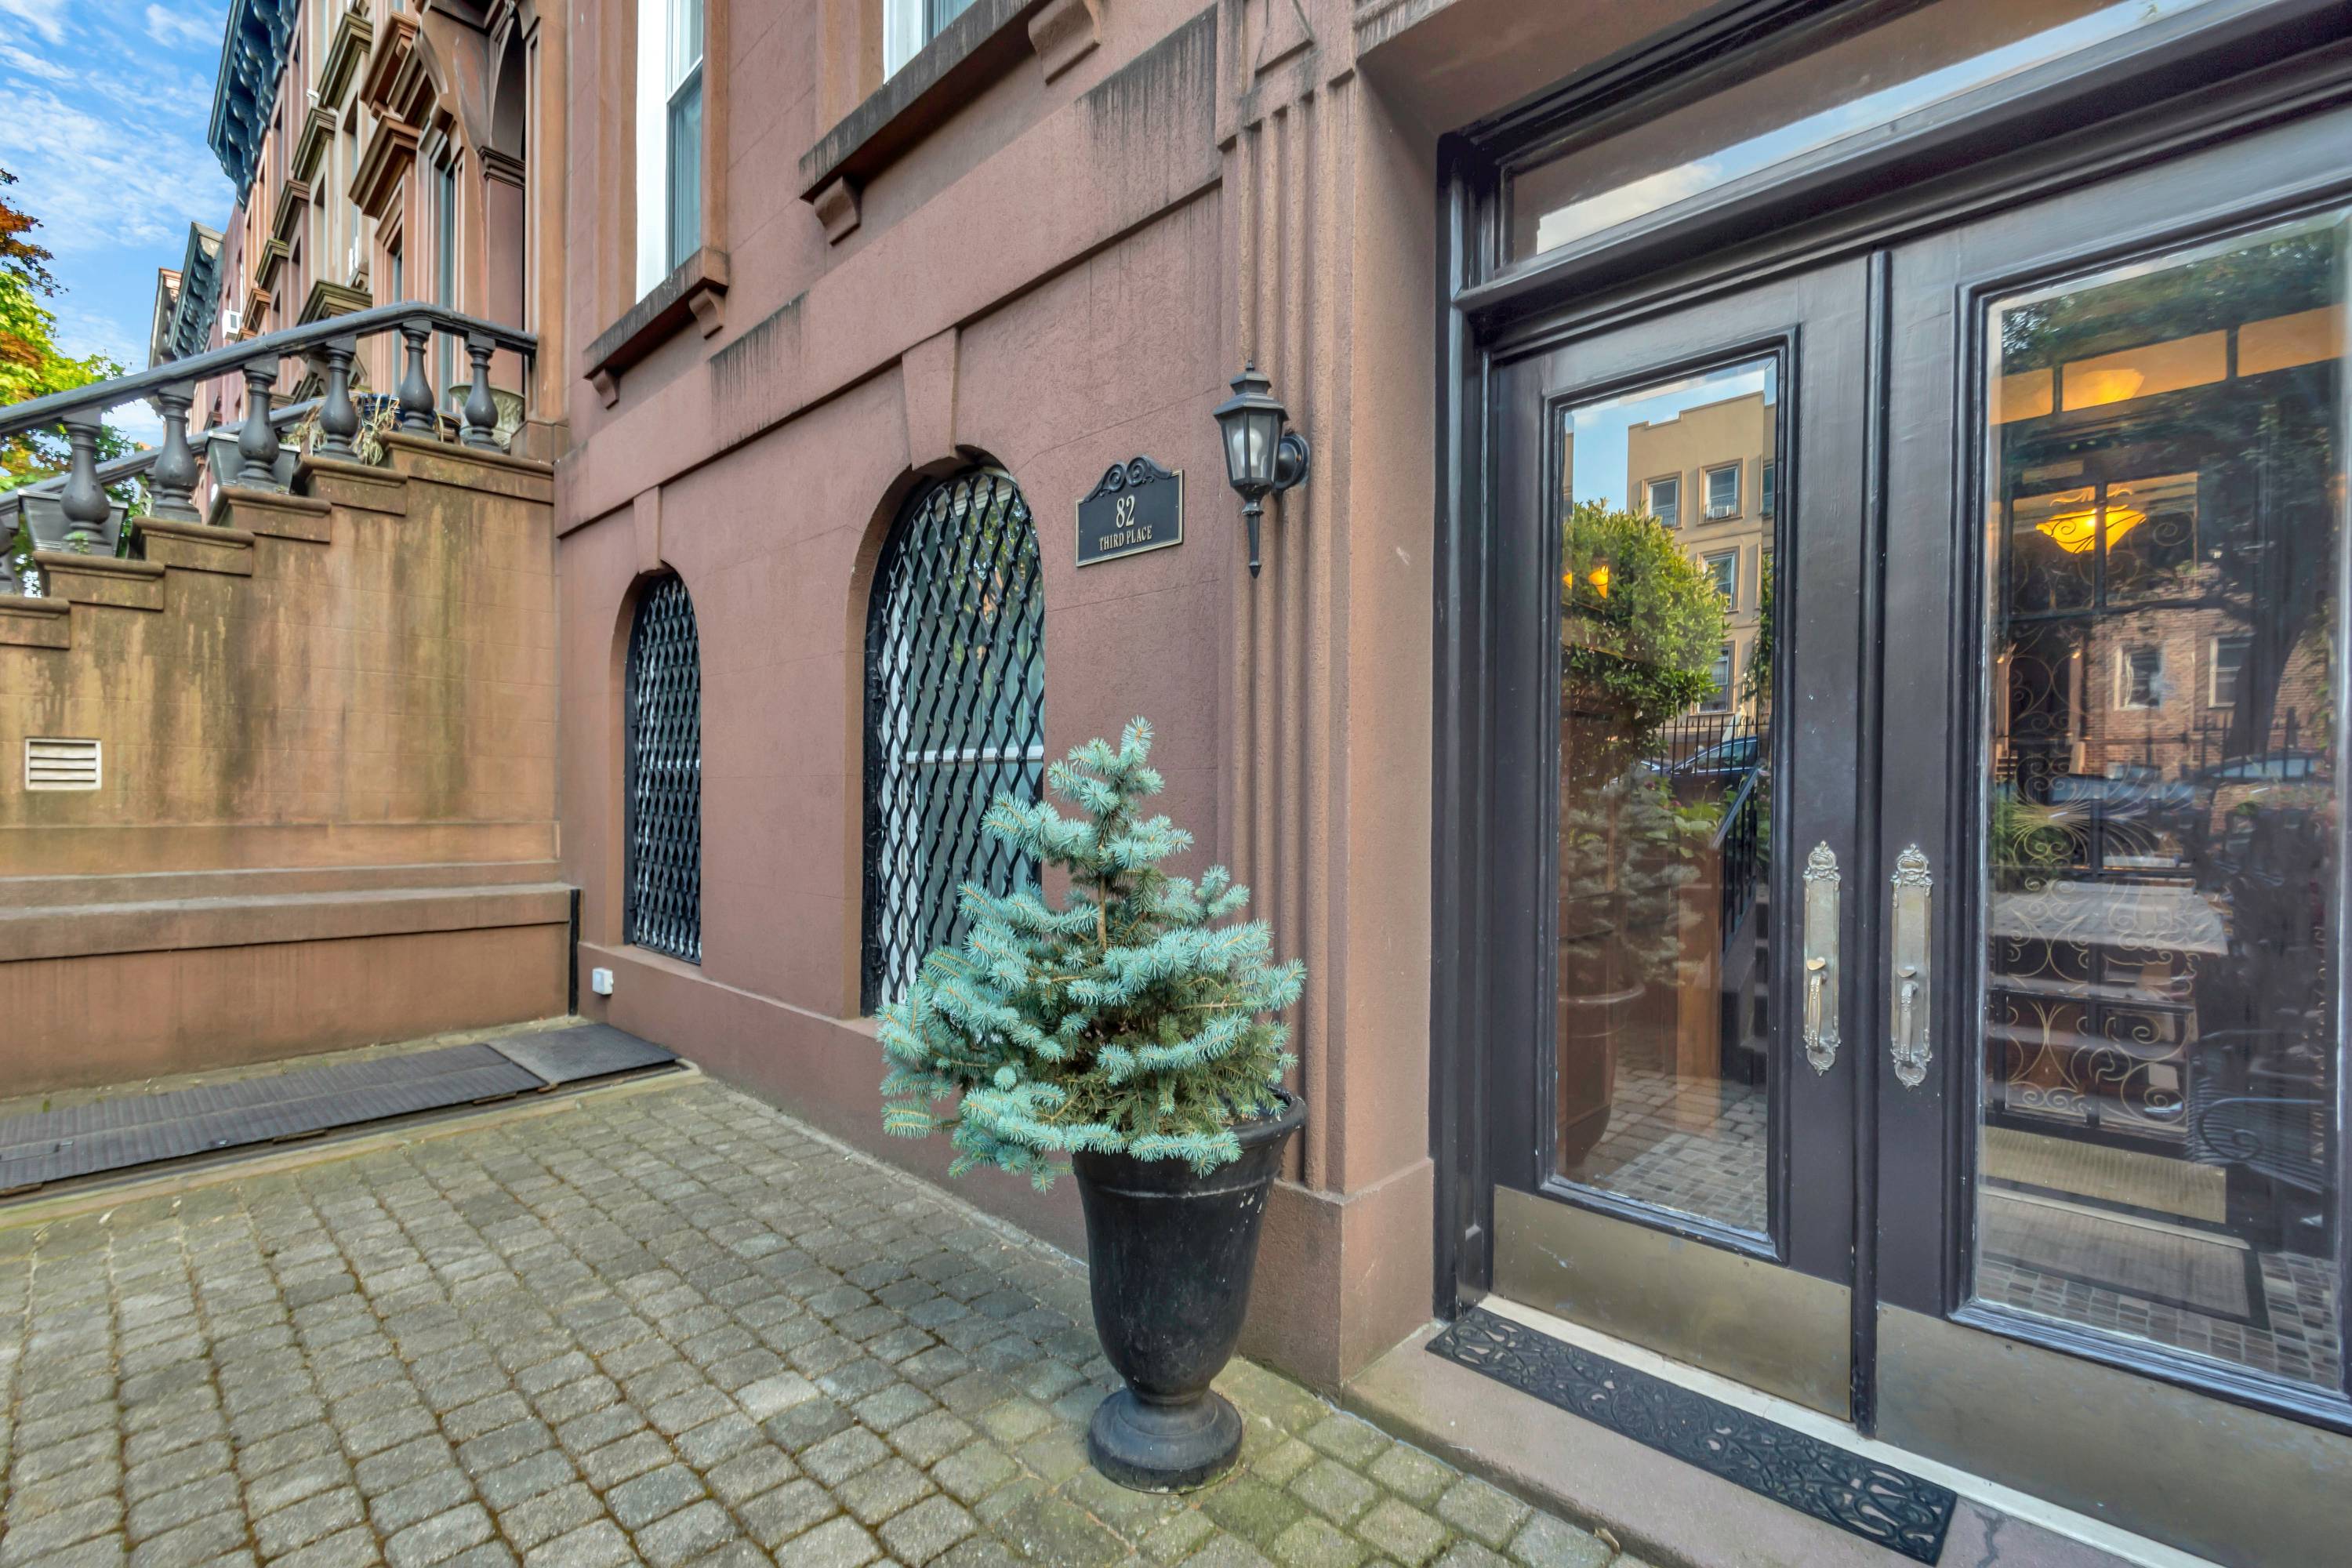 CARROLL GARDENS Three Family Available Welcome to 82 Third Place.